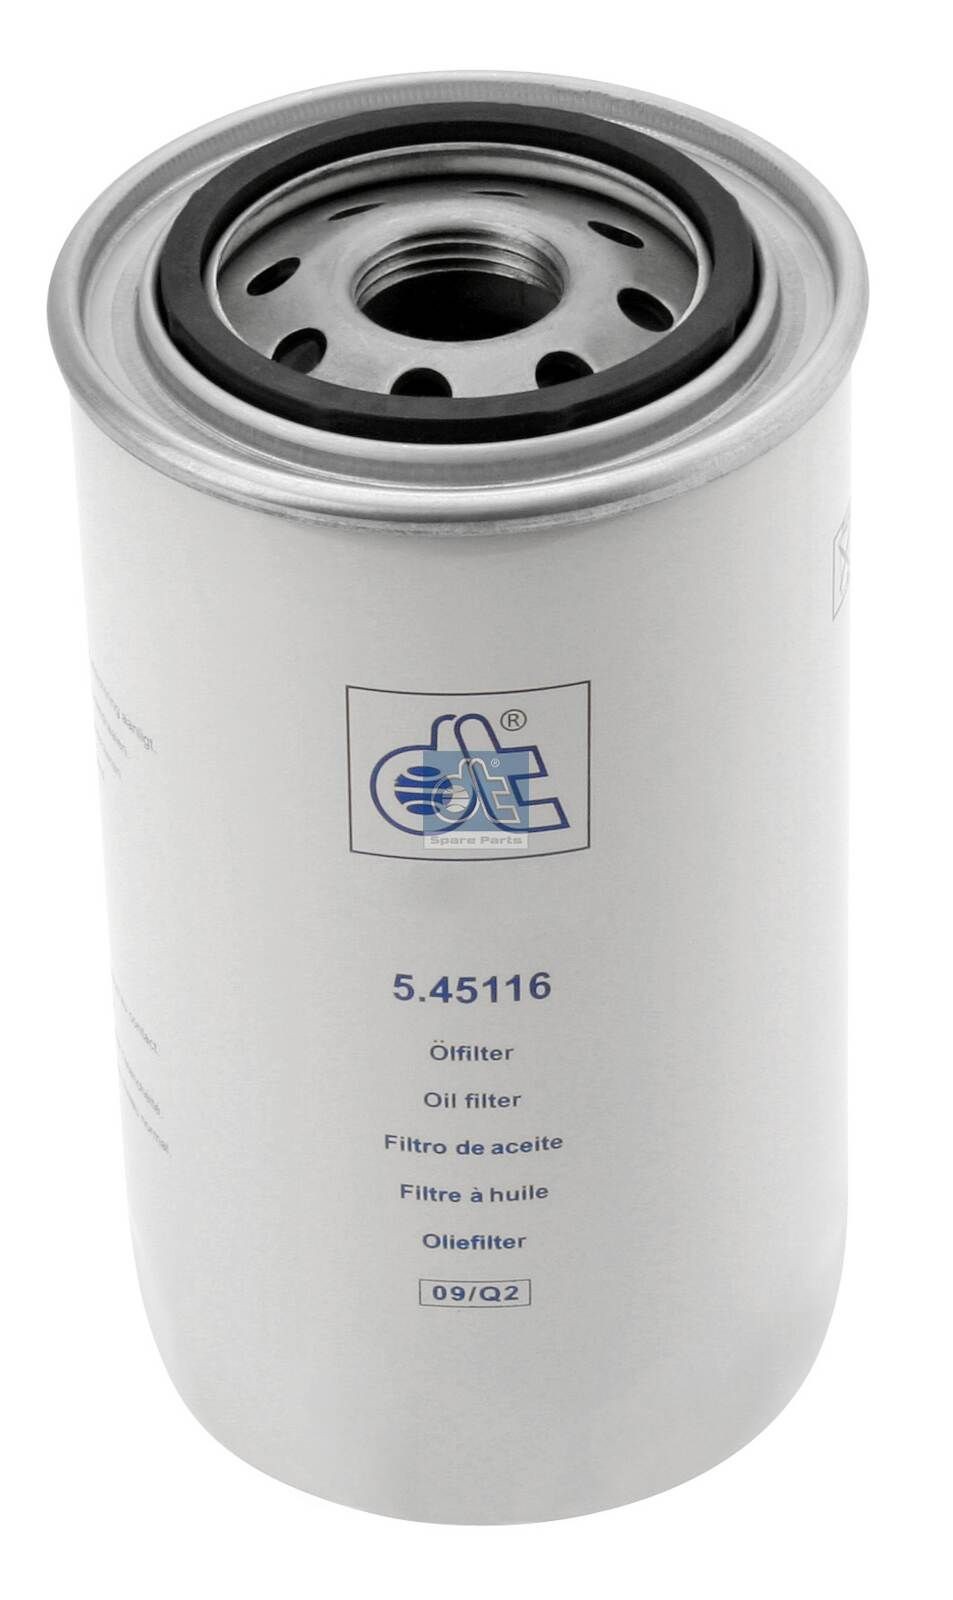 H19W10 DT Spare Parts 5.45116 Oil filter 72516587